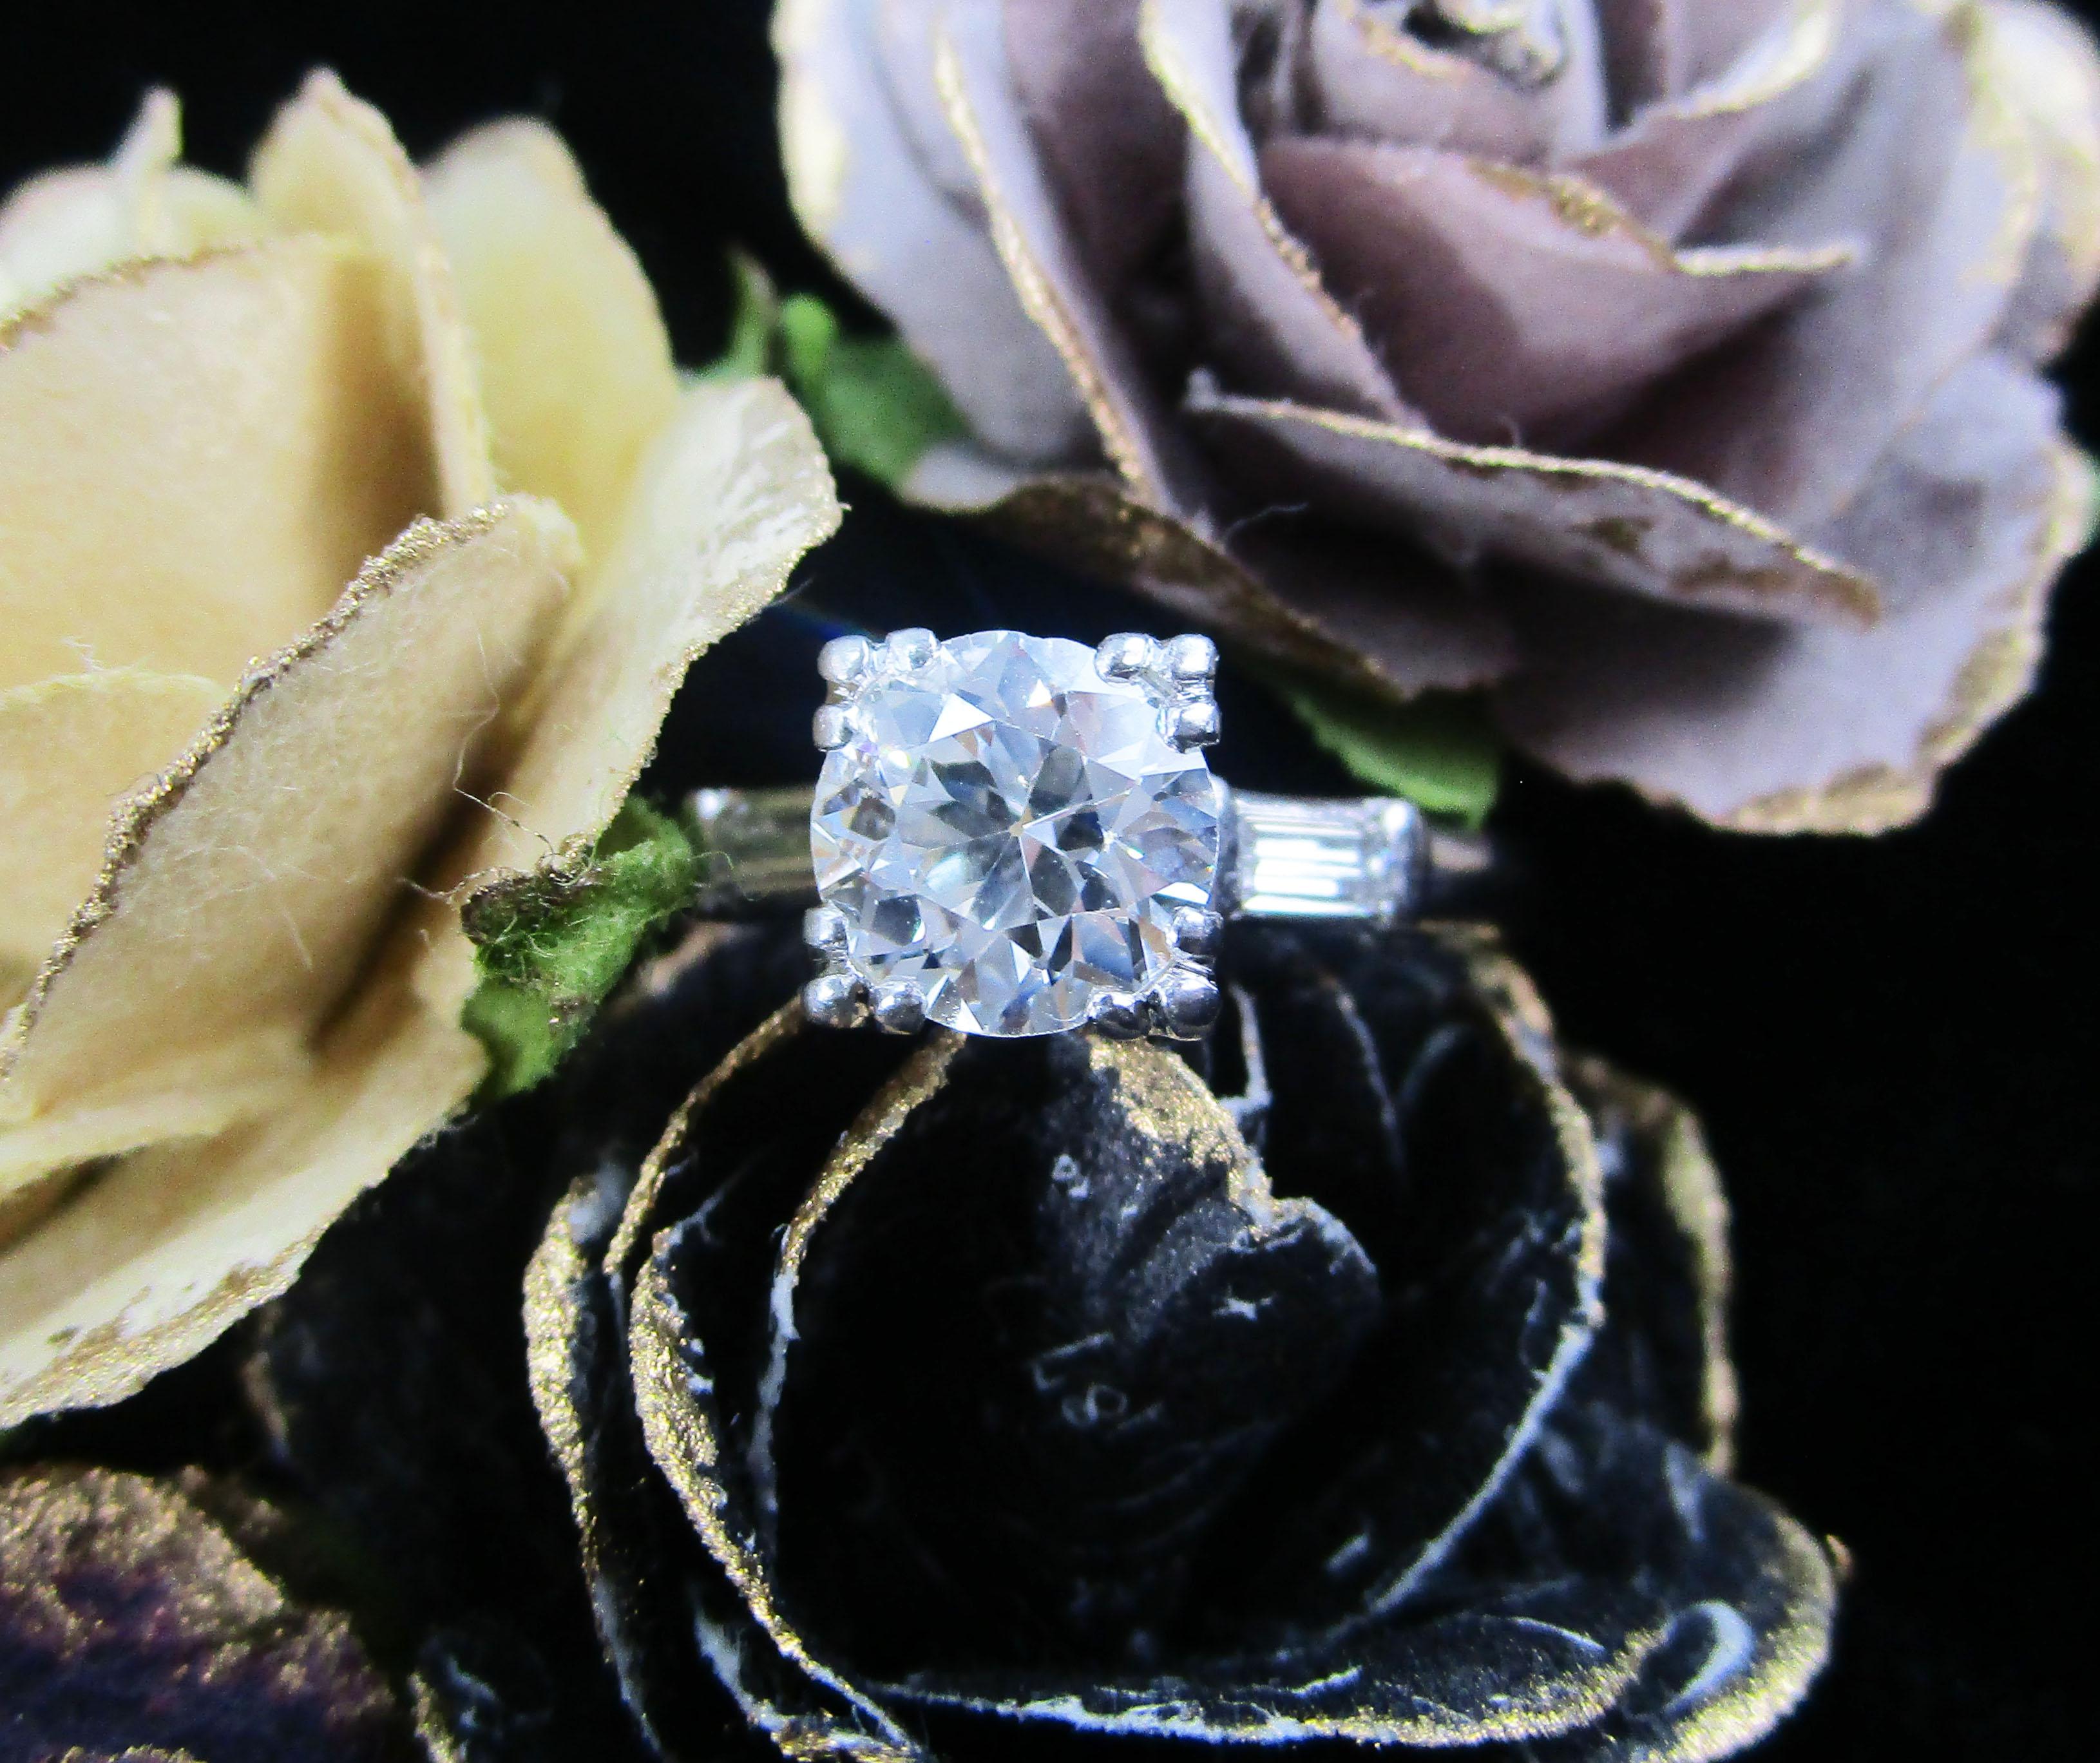 This is an absolutely gorgeous Art Deco ring in platinum with a stunning 1+ carat old Euro cut diamond center accented by two beautiful baguette diamonds! The charm of the Deco era is clear in the linear design of this ring. The two baguettes on